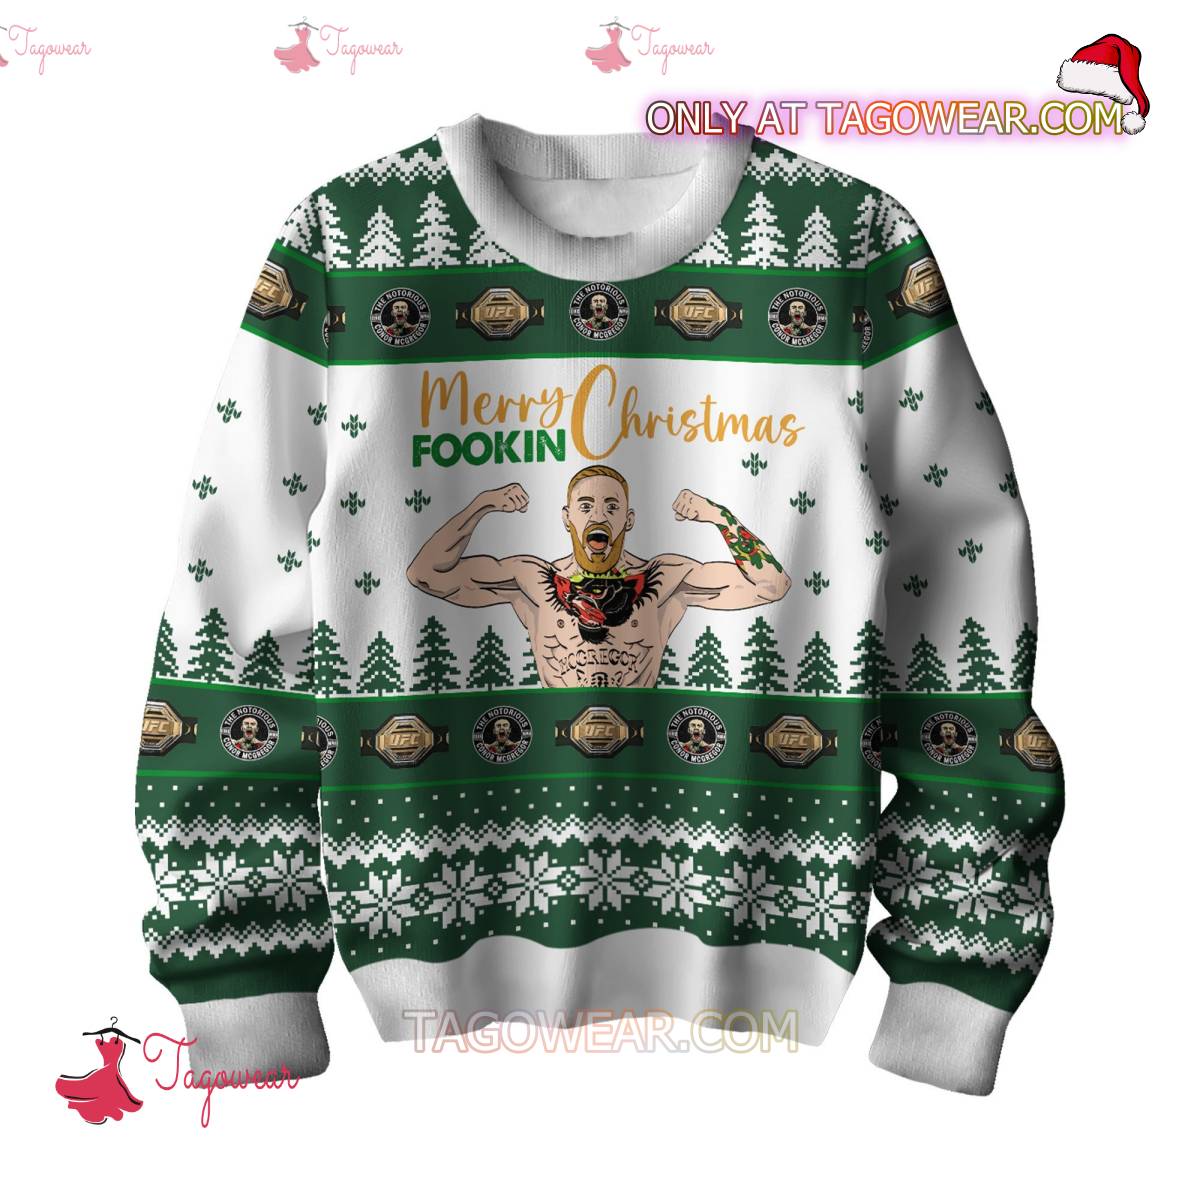 Conor Mcgregor Merry Christmas Fookin Ugly Sweater a